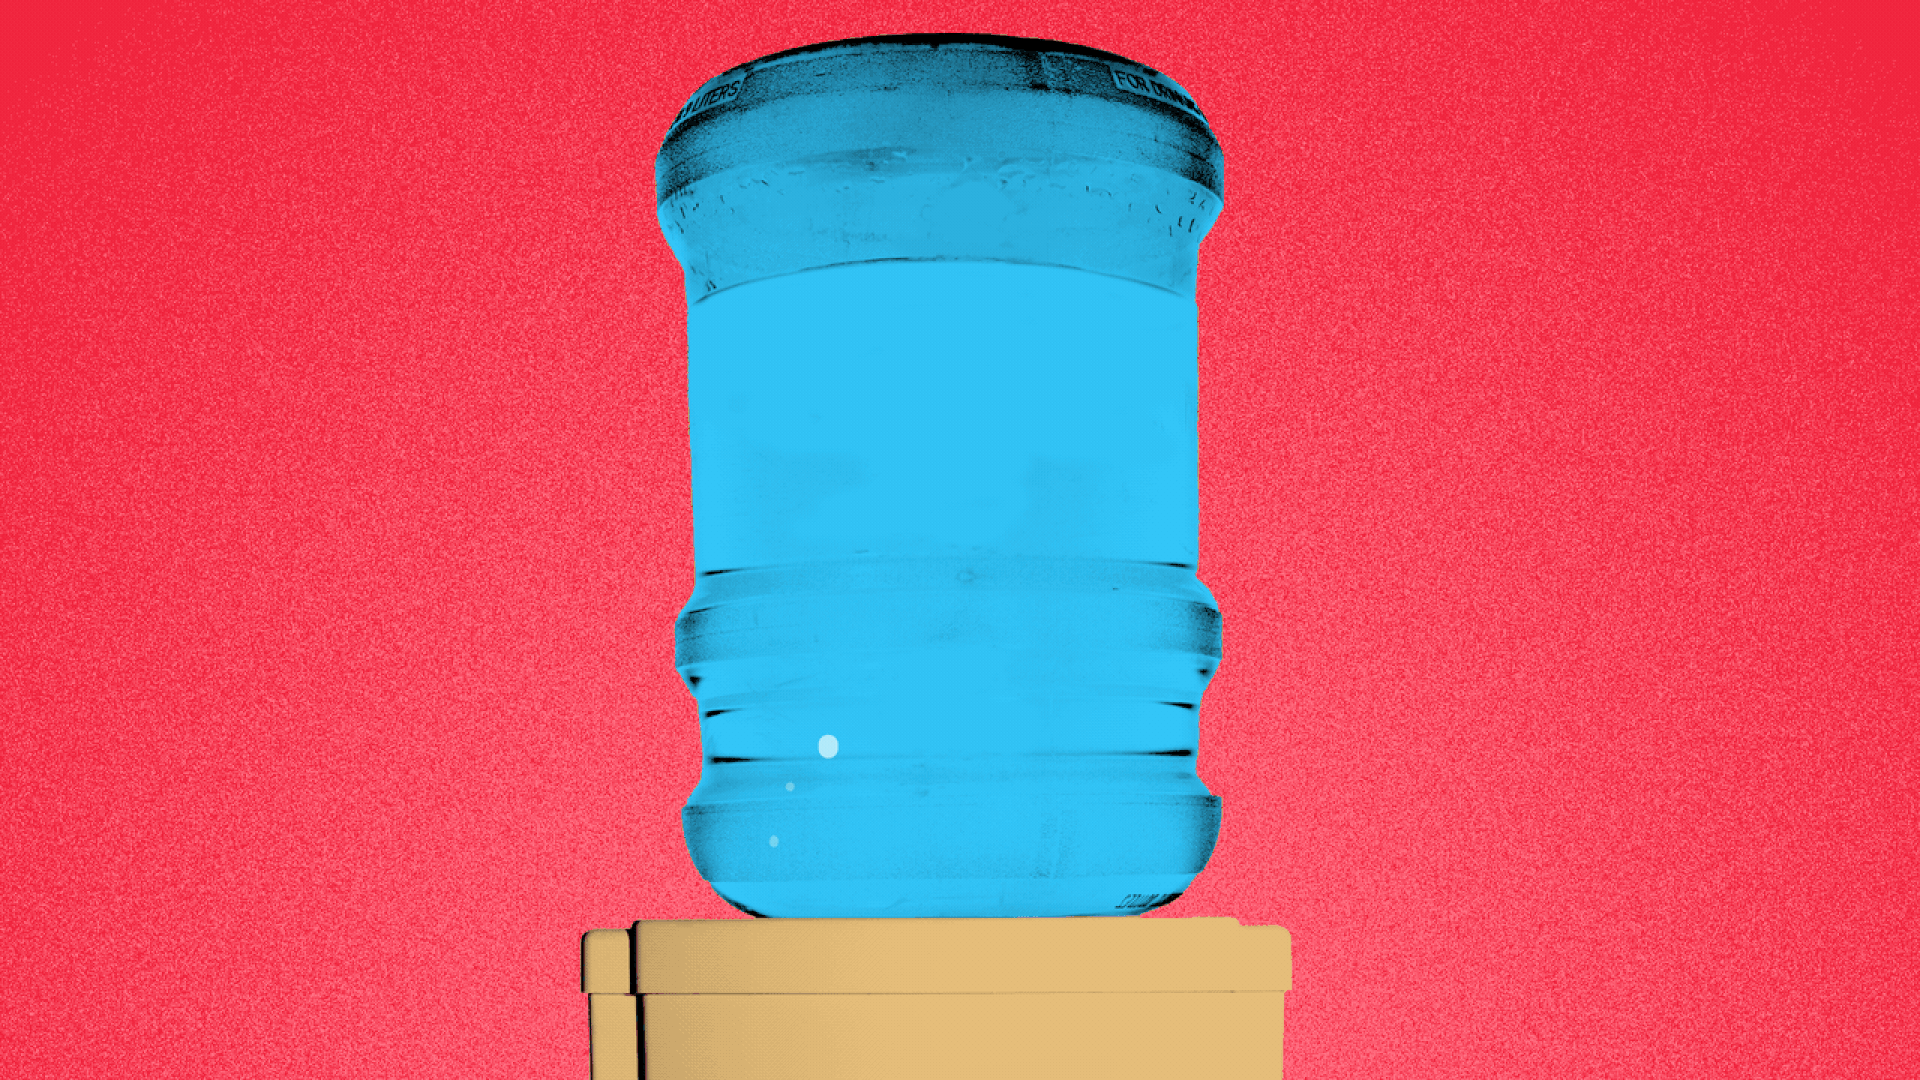 Illustration of a water cooler, with the word "nope" bubbling up from the bottom.